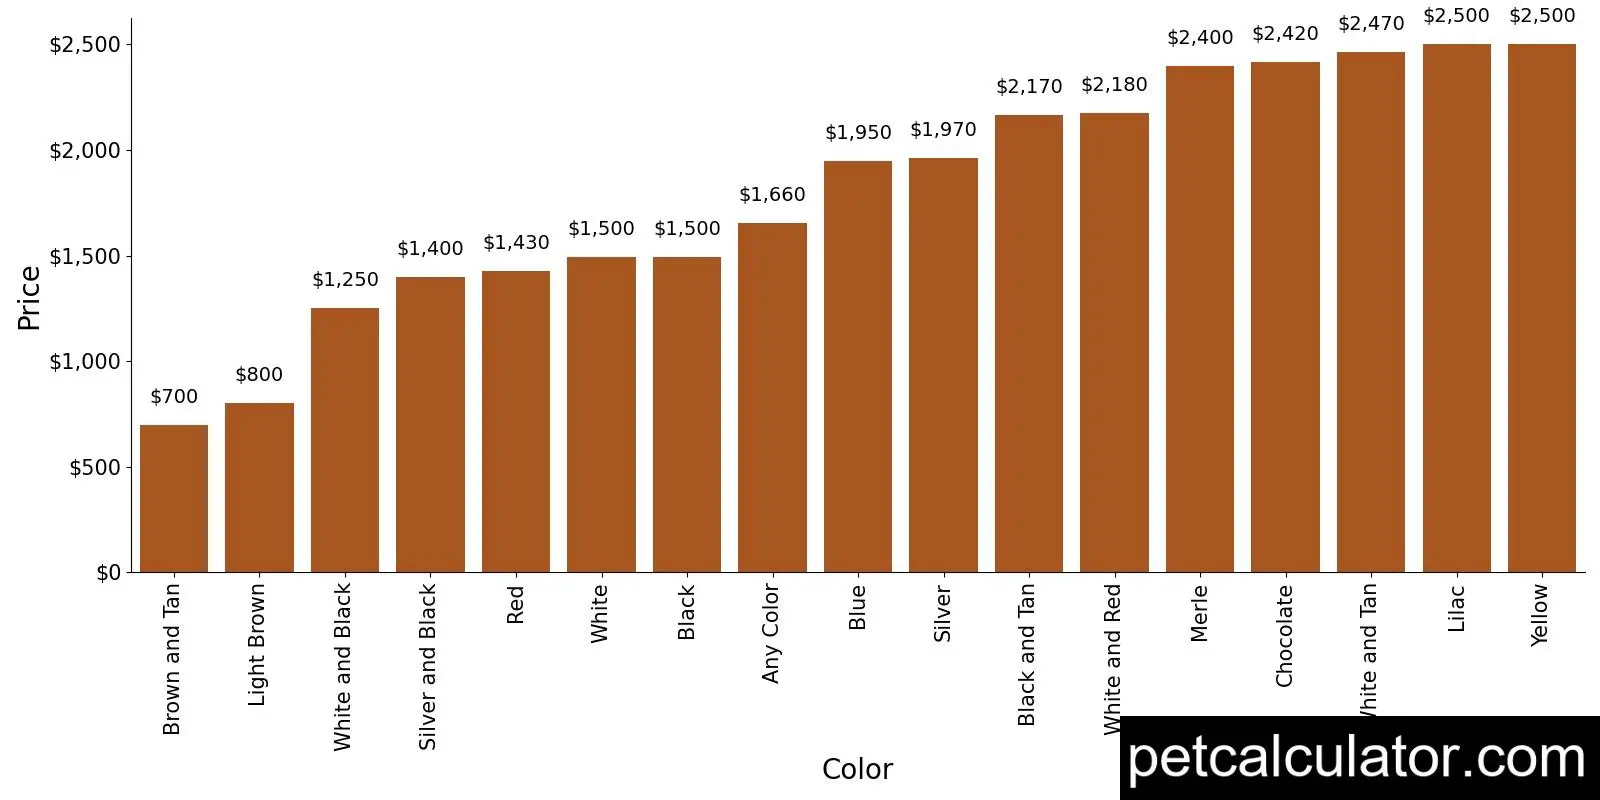 Price of Cocker Spaniel by Color 